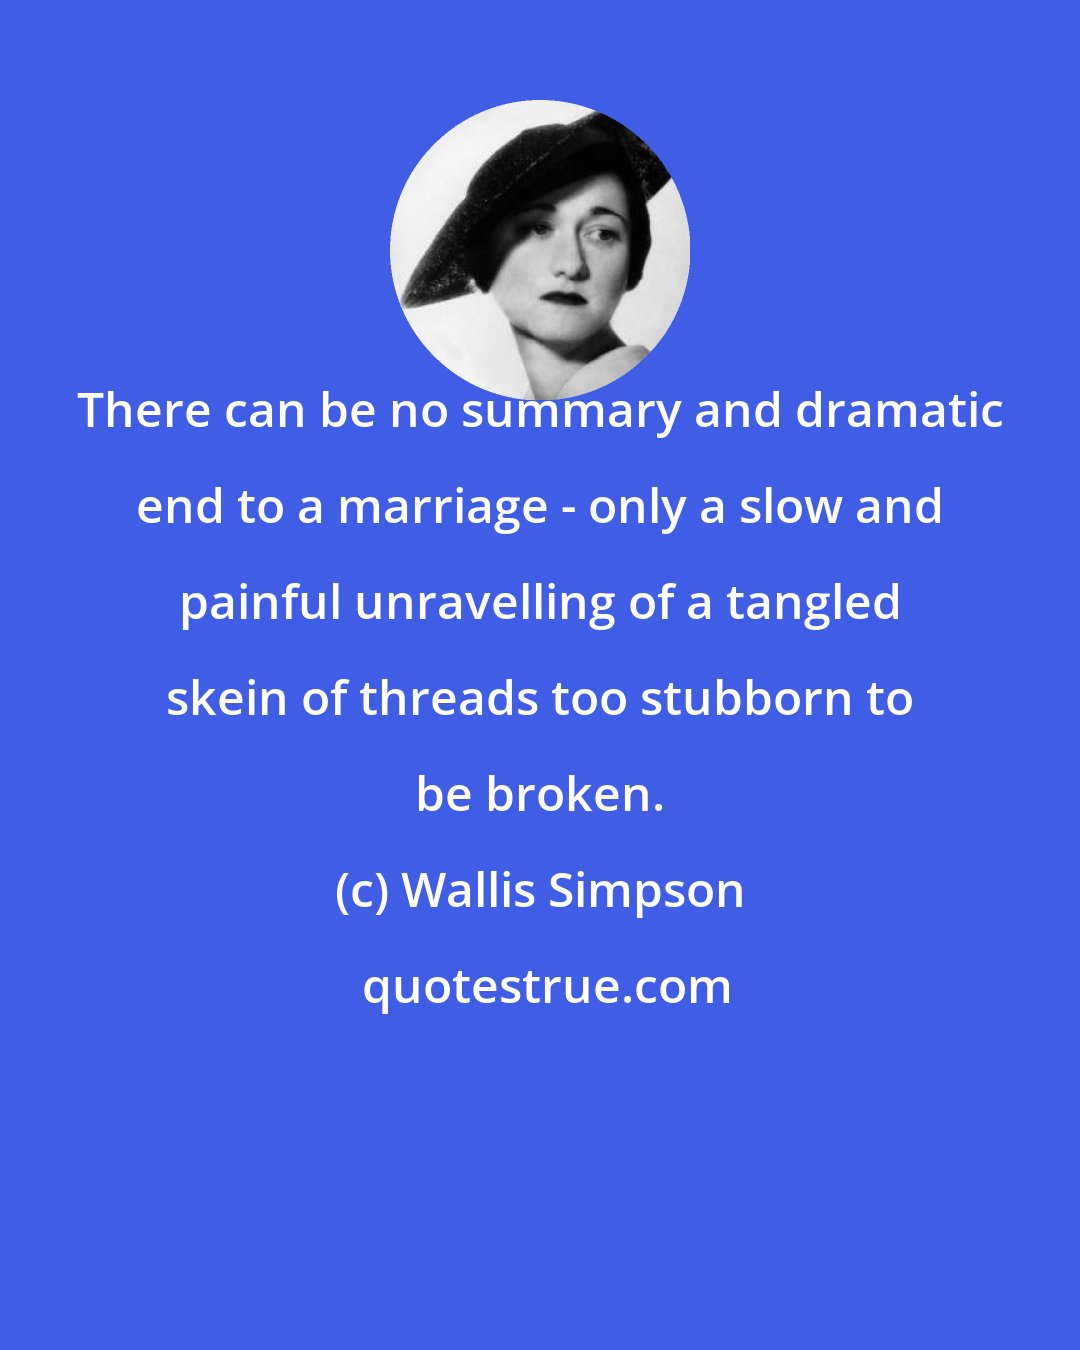 Wallis Simpson: There can be no summary and dramatic end to a marriage - only a slow and painful unravelling of a tangled skein of threads too stubborn to be broken.